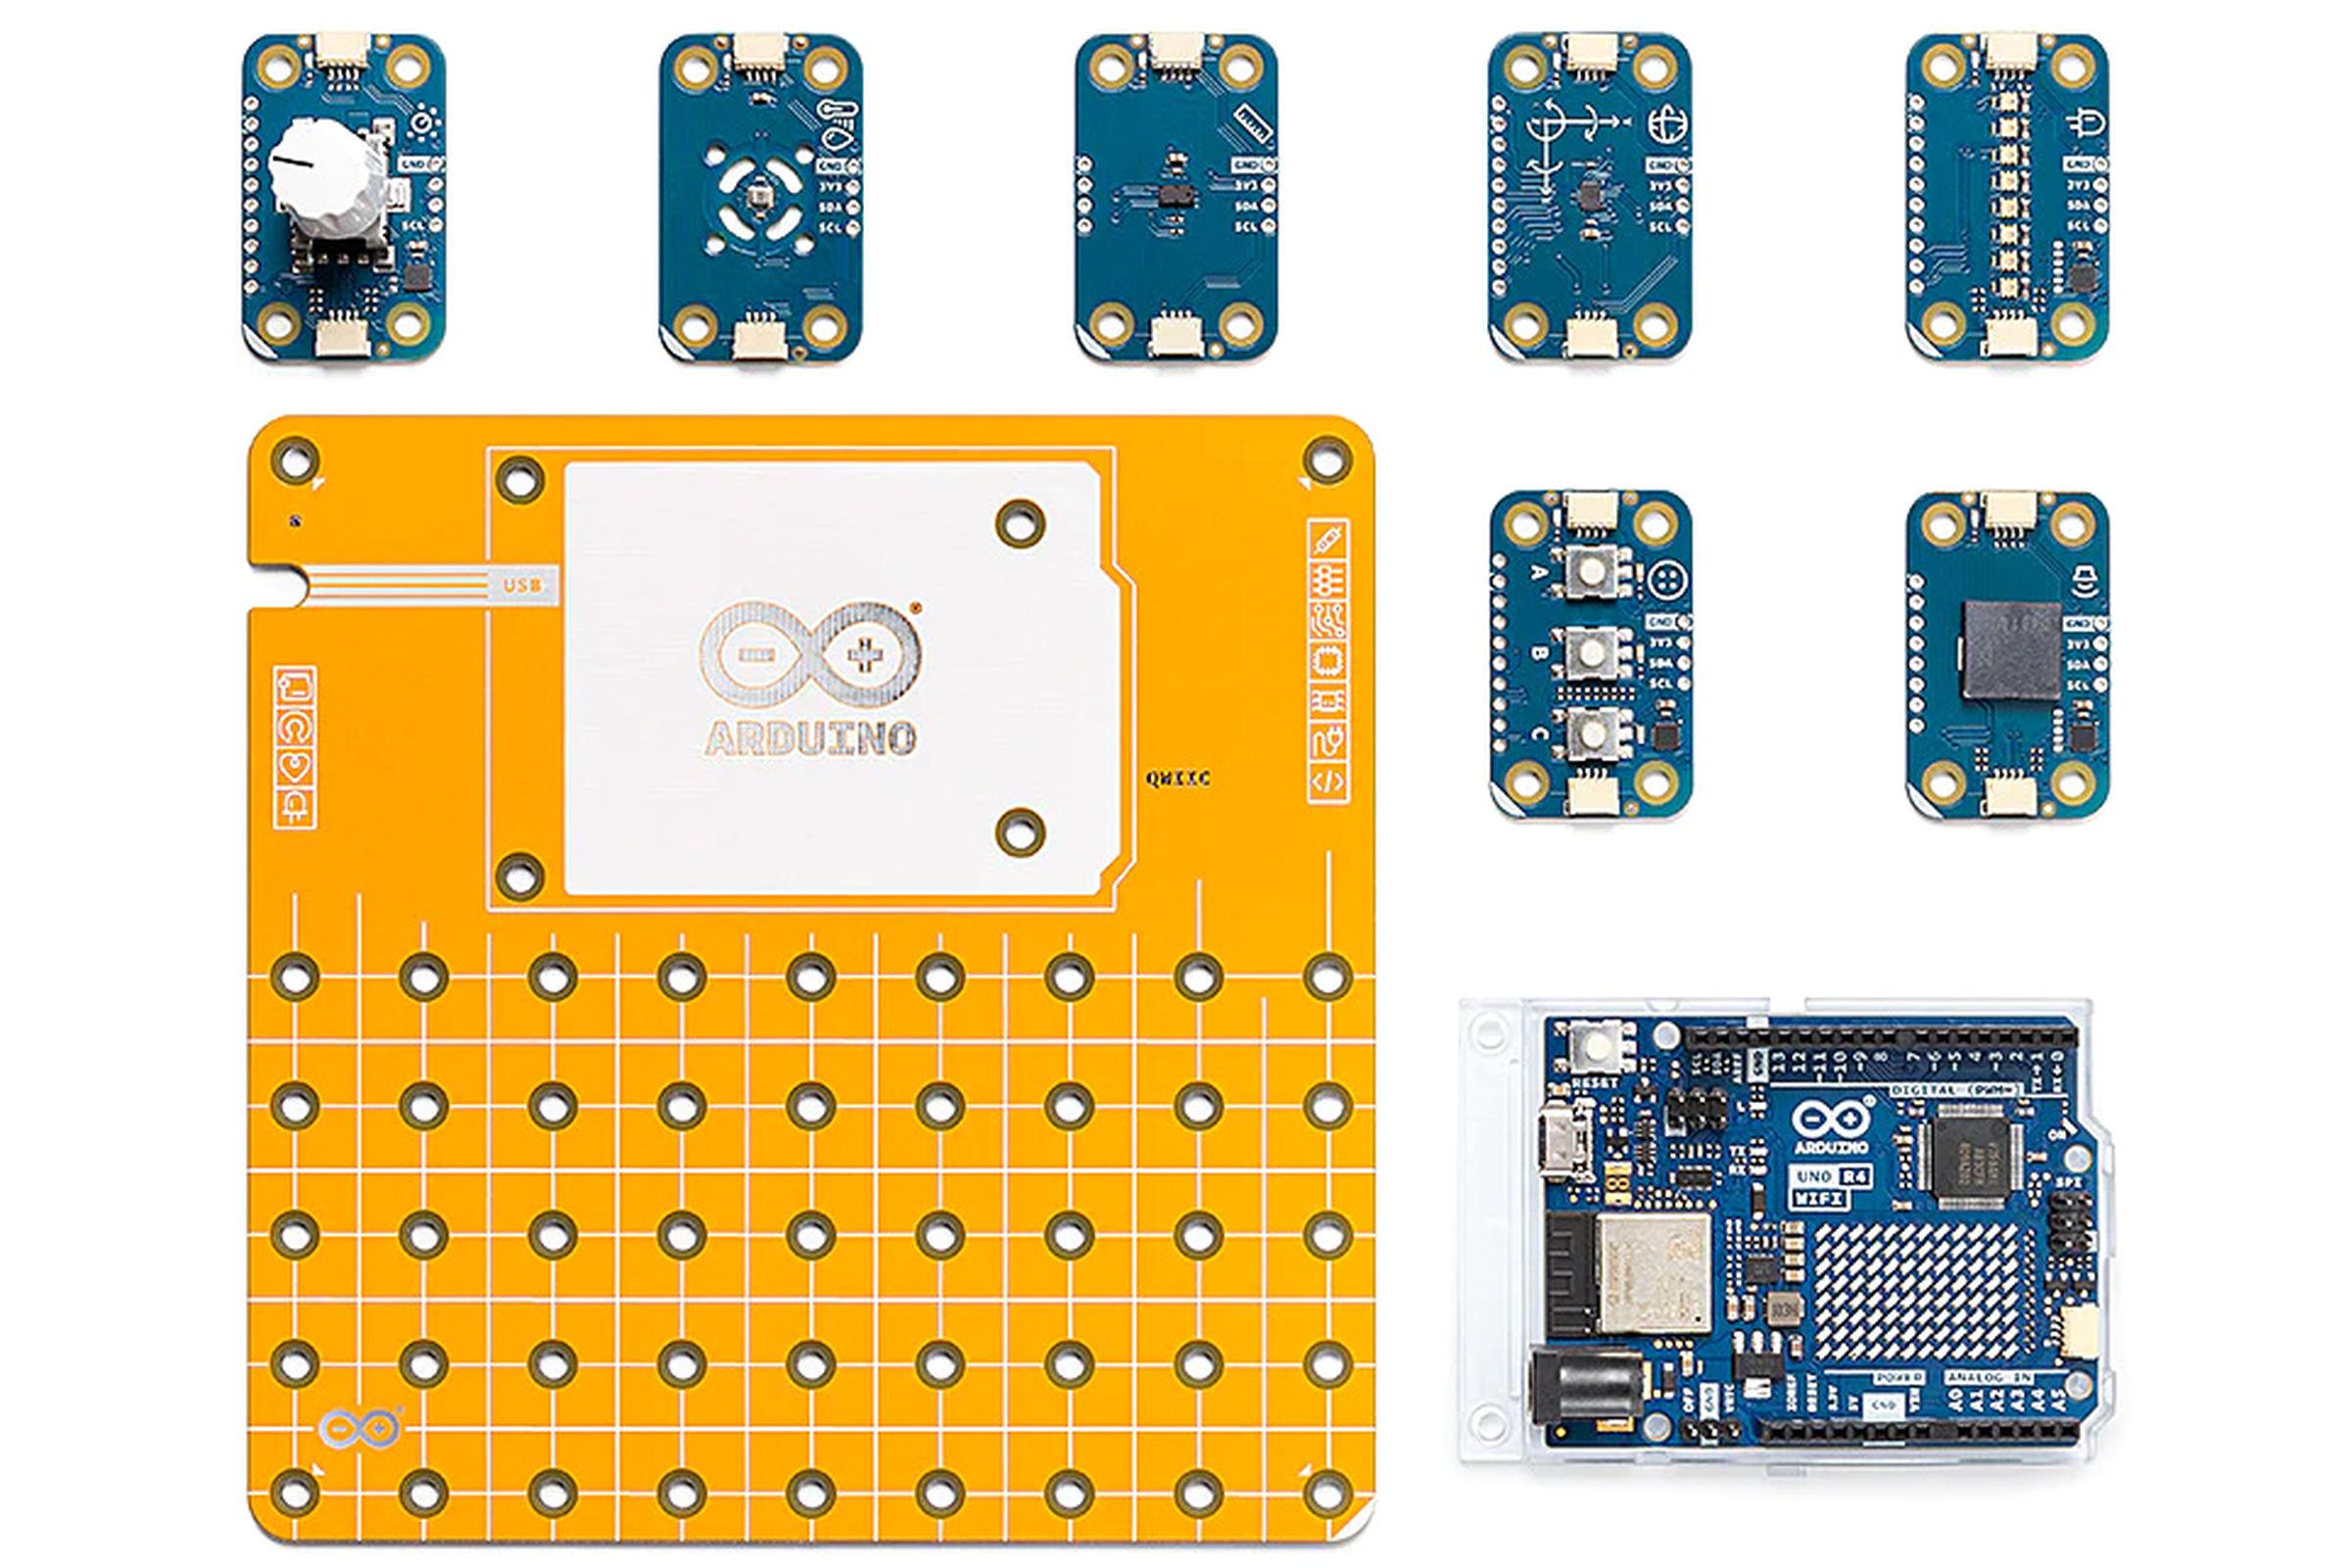 The various electronic components included with the Arduino Plug and Make Kit.